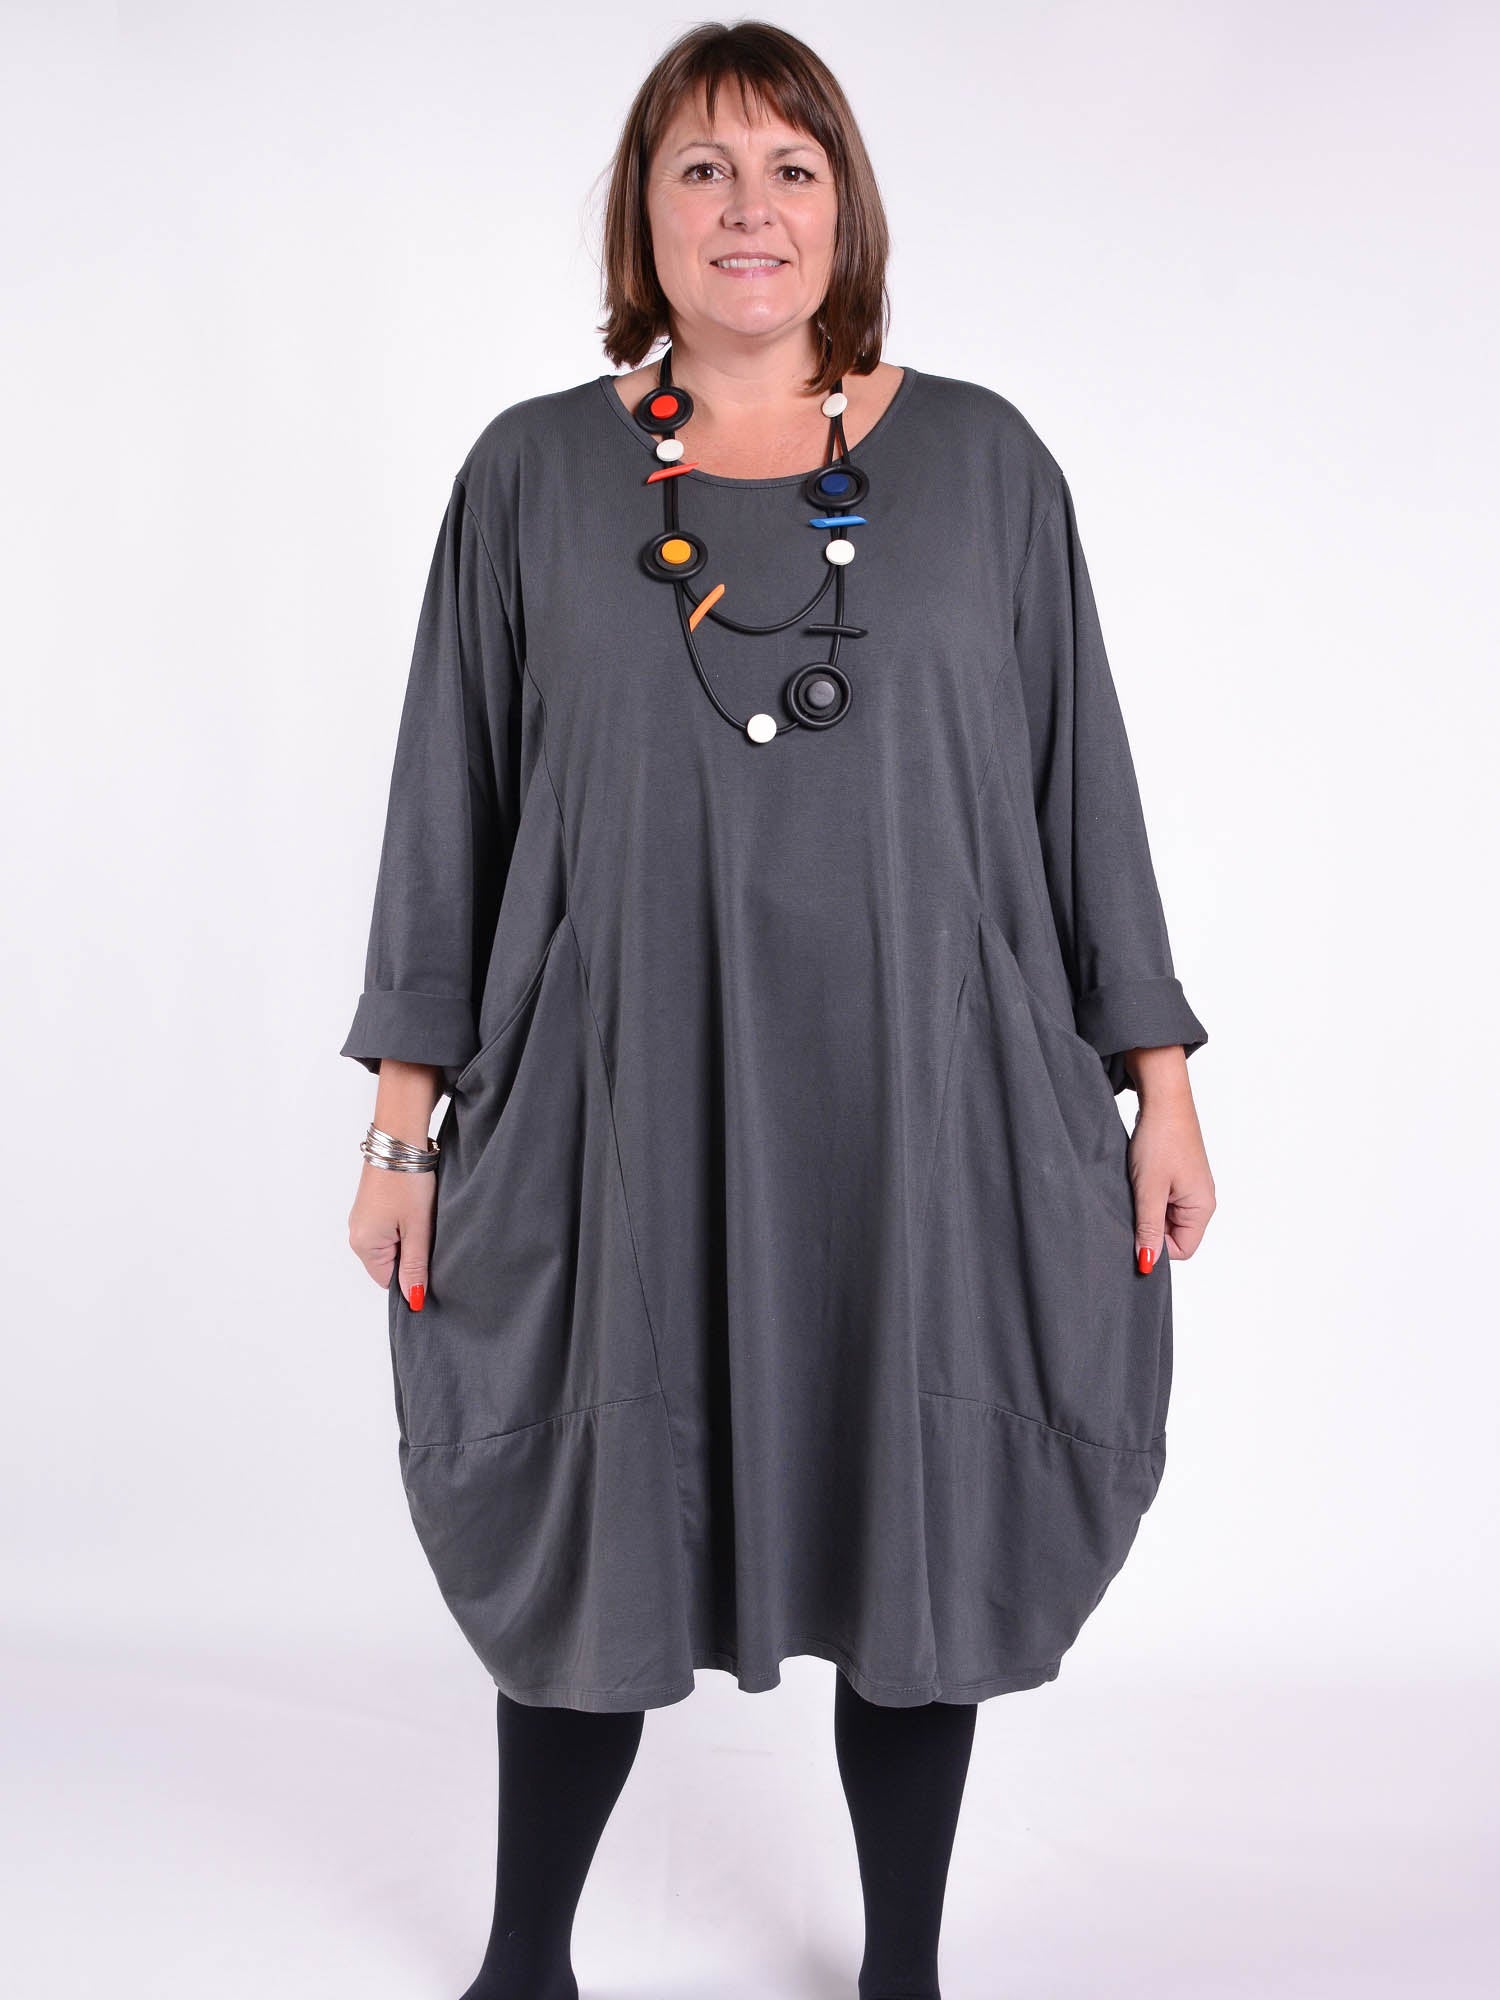 Lagenlook Parachute Dress With Pockets Cotton - 9451C, Dresses, Pure Plus Clothing, Lagenlook Clothing, Plus Size Fashion, Over 50 Fashion